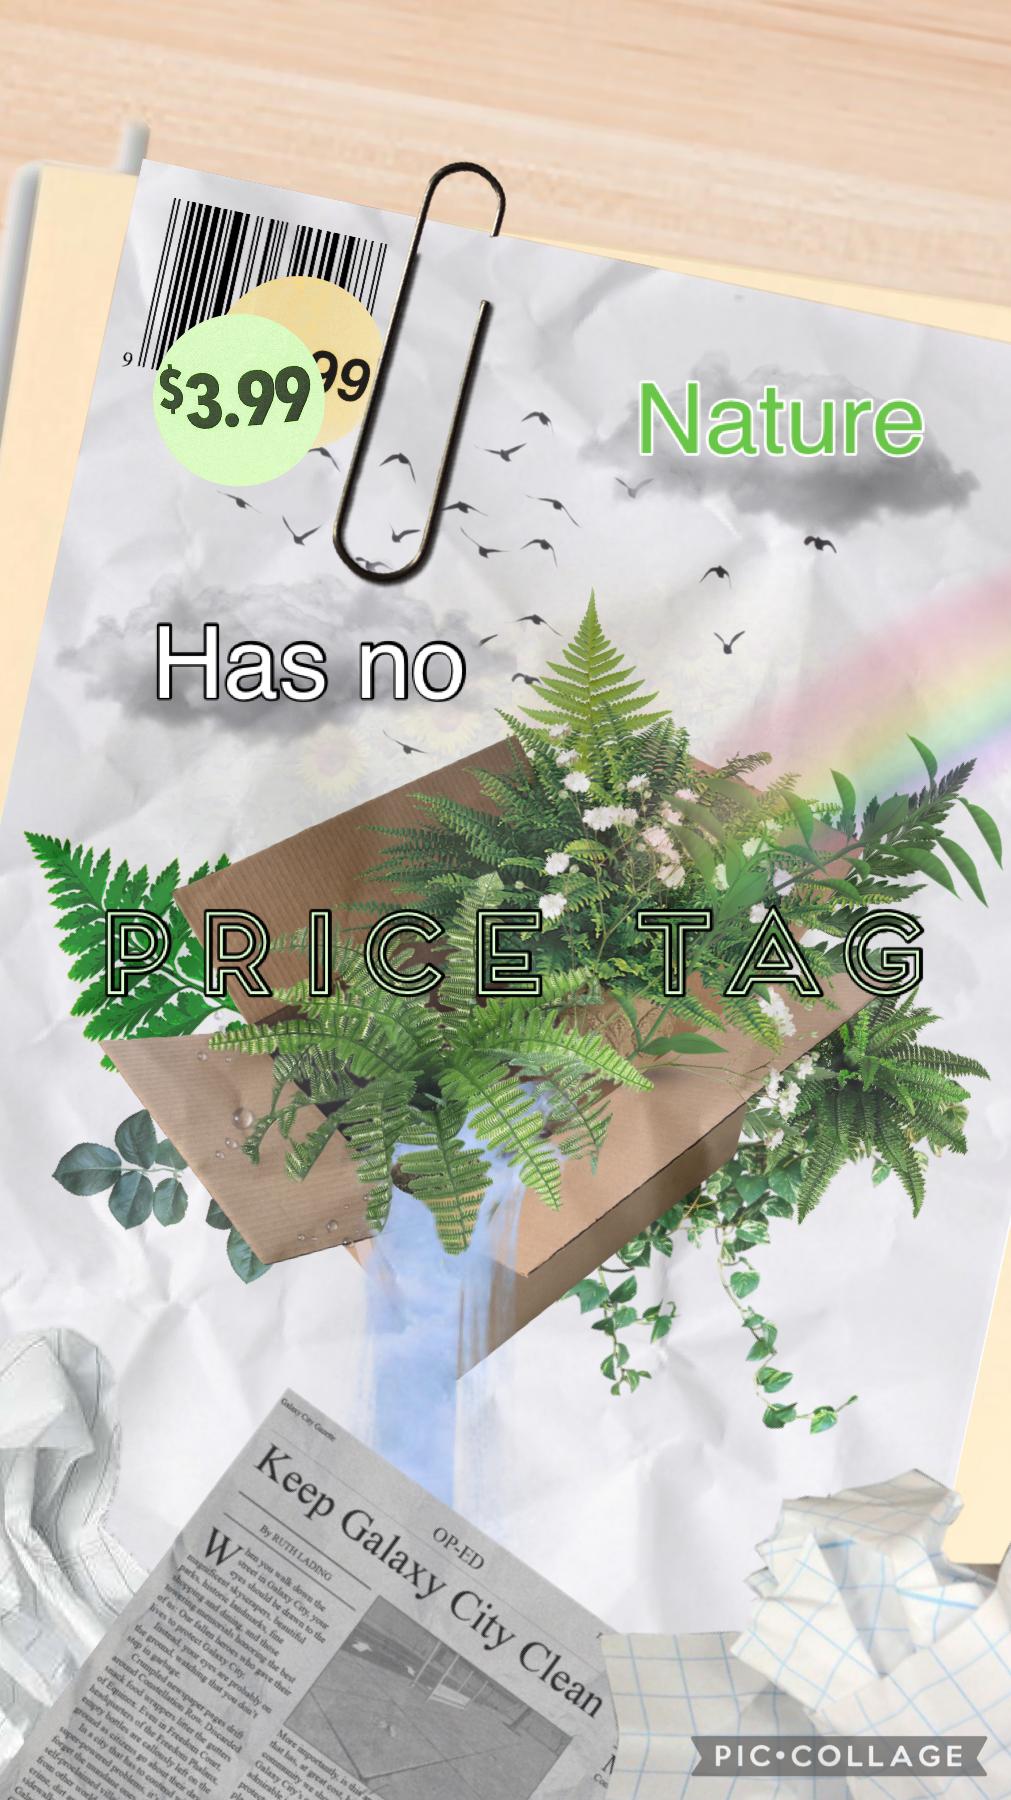 ♻️Tap🌱

“nature has no 𝕡𝕣𝕚𝕔𝕖 𝕥𝕒𝕘“ 
I made this and then realized earth day is like at the end of the month, so um, happy early earth day? Hope you like it! 💚